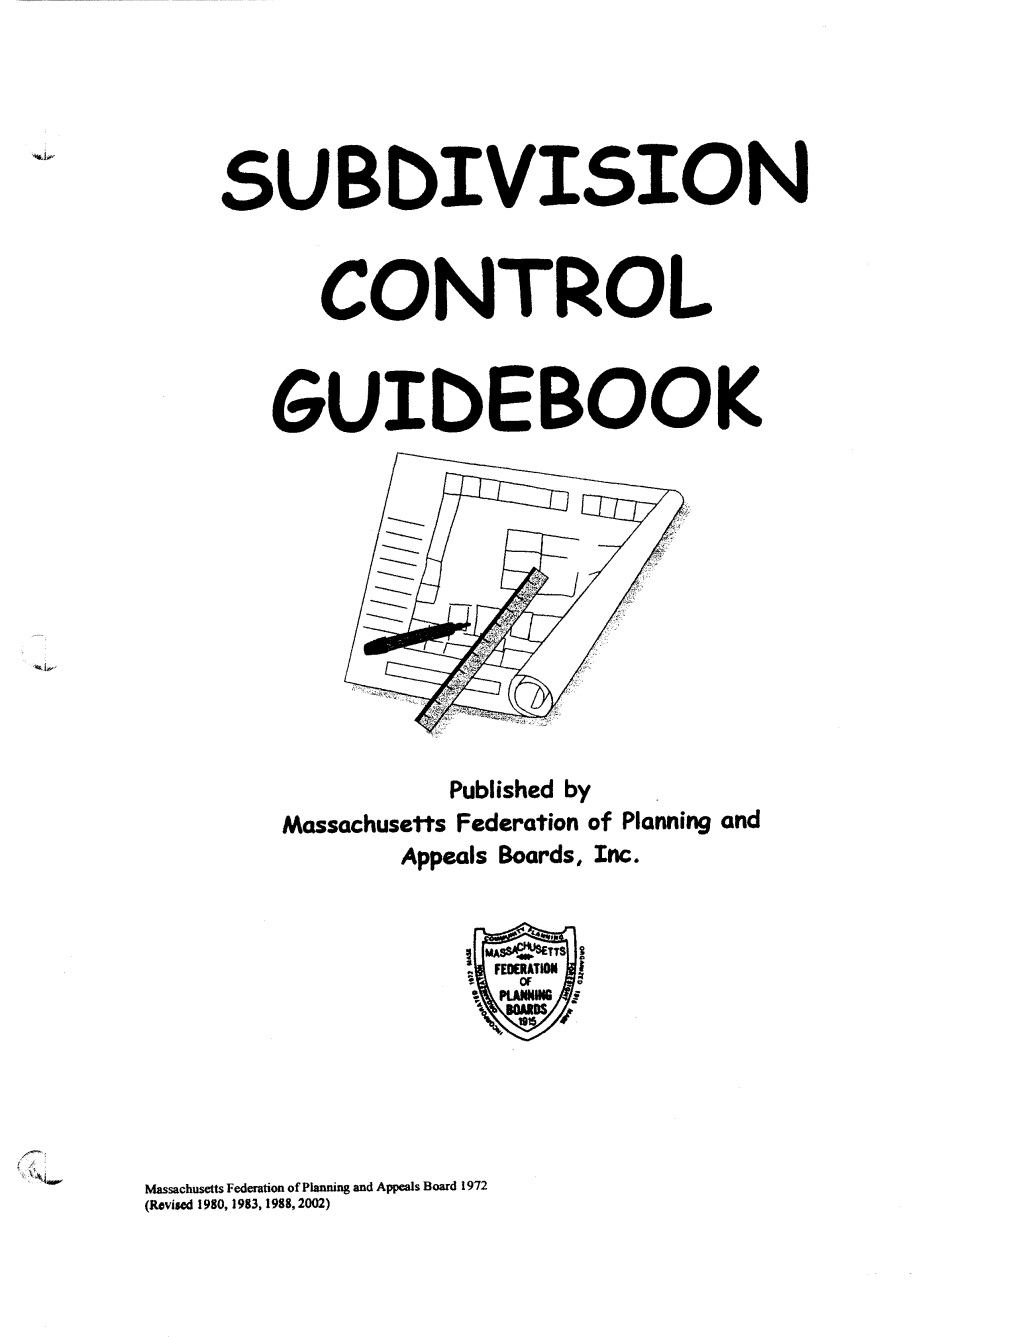 Subdivision Control Guidebook Mass Fed of Planning & Appeals Boards